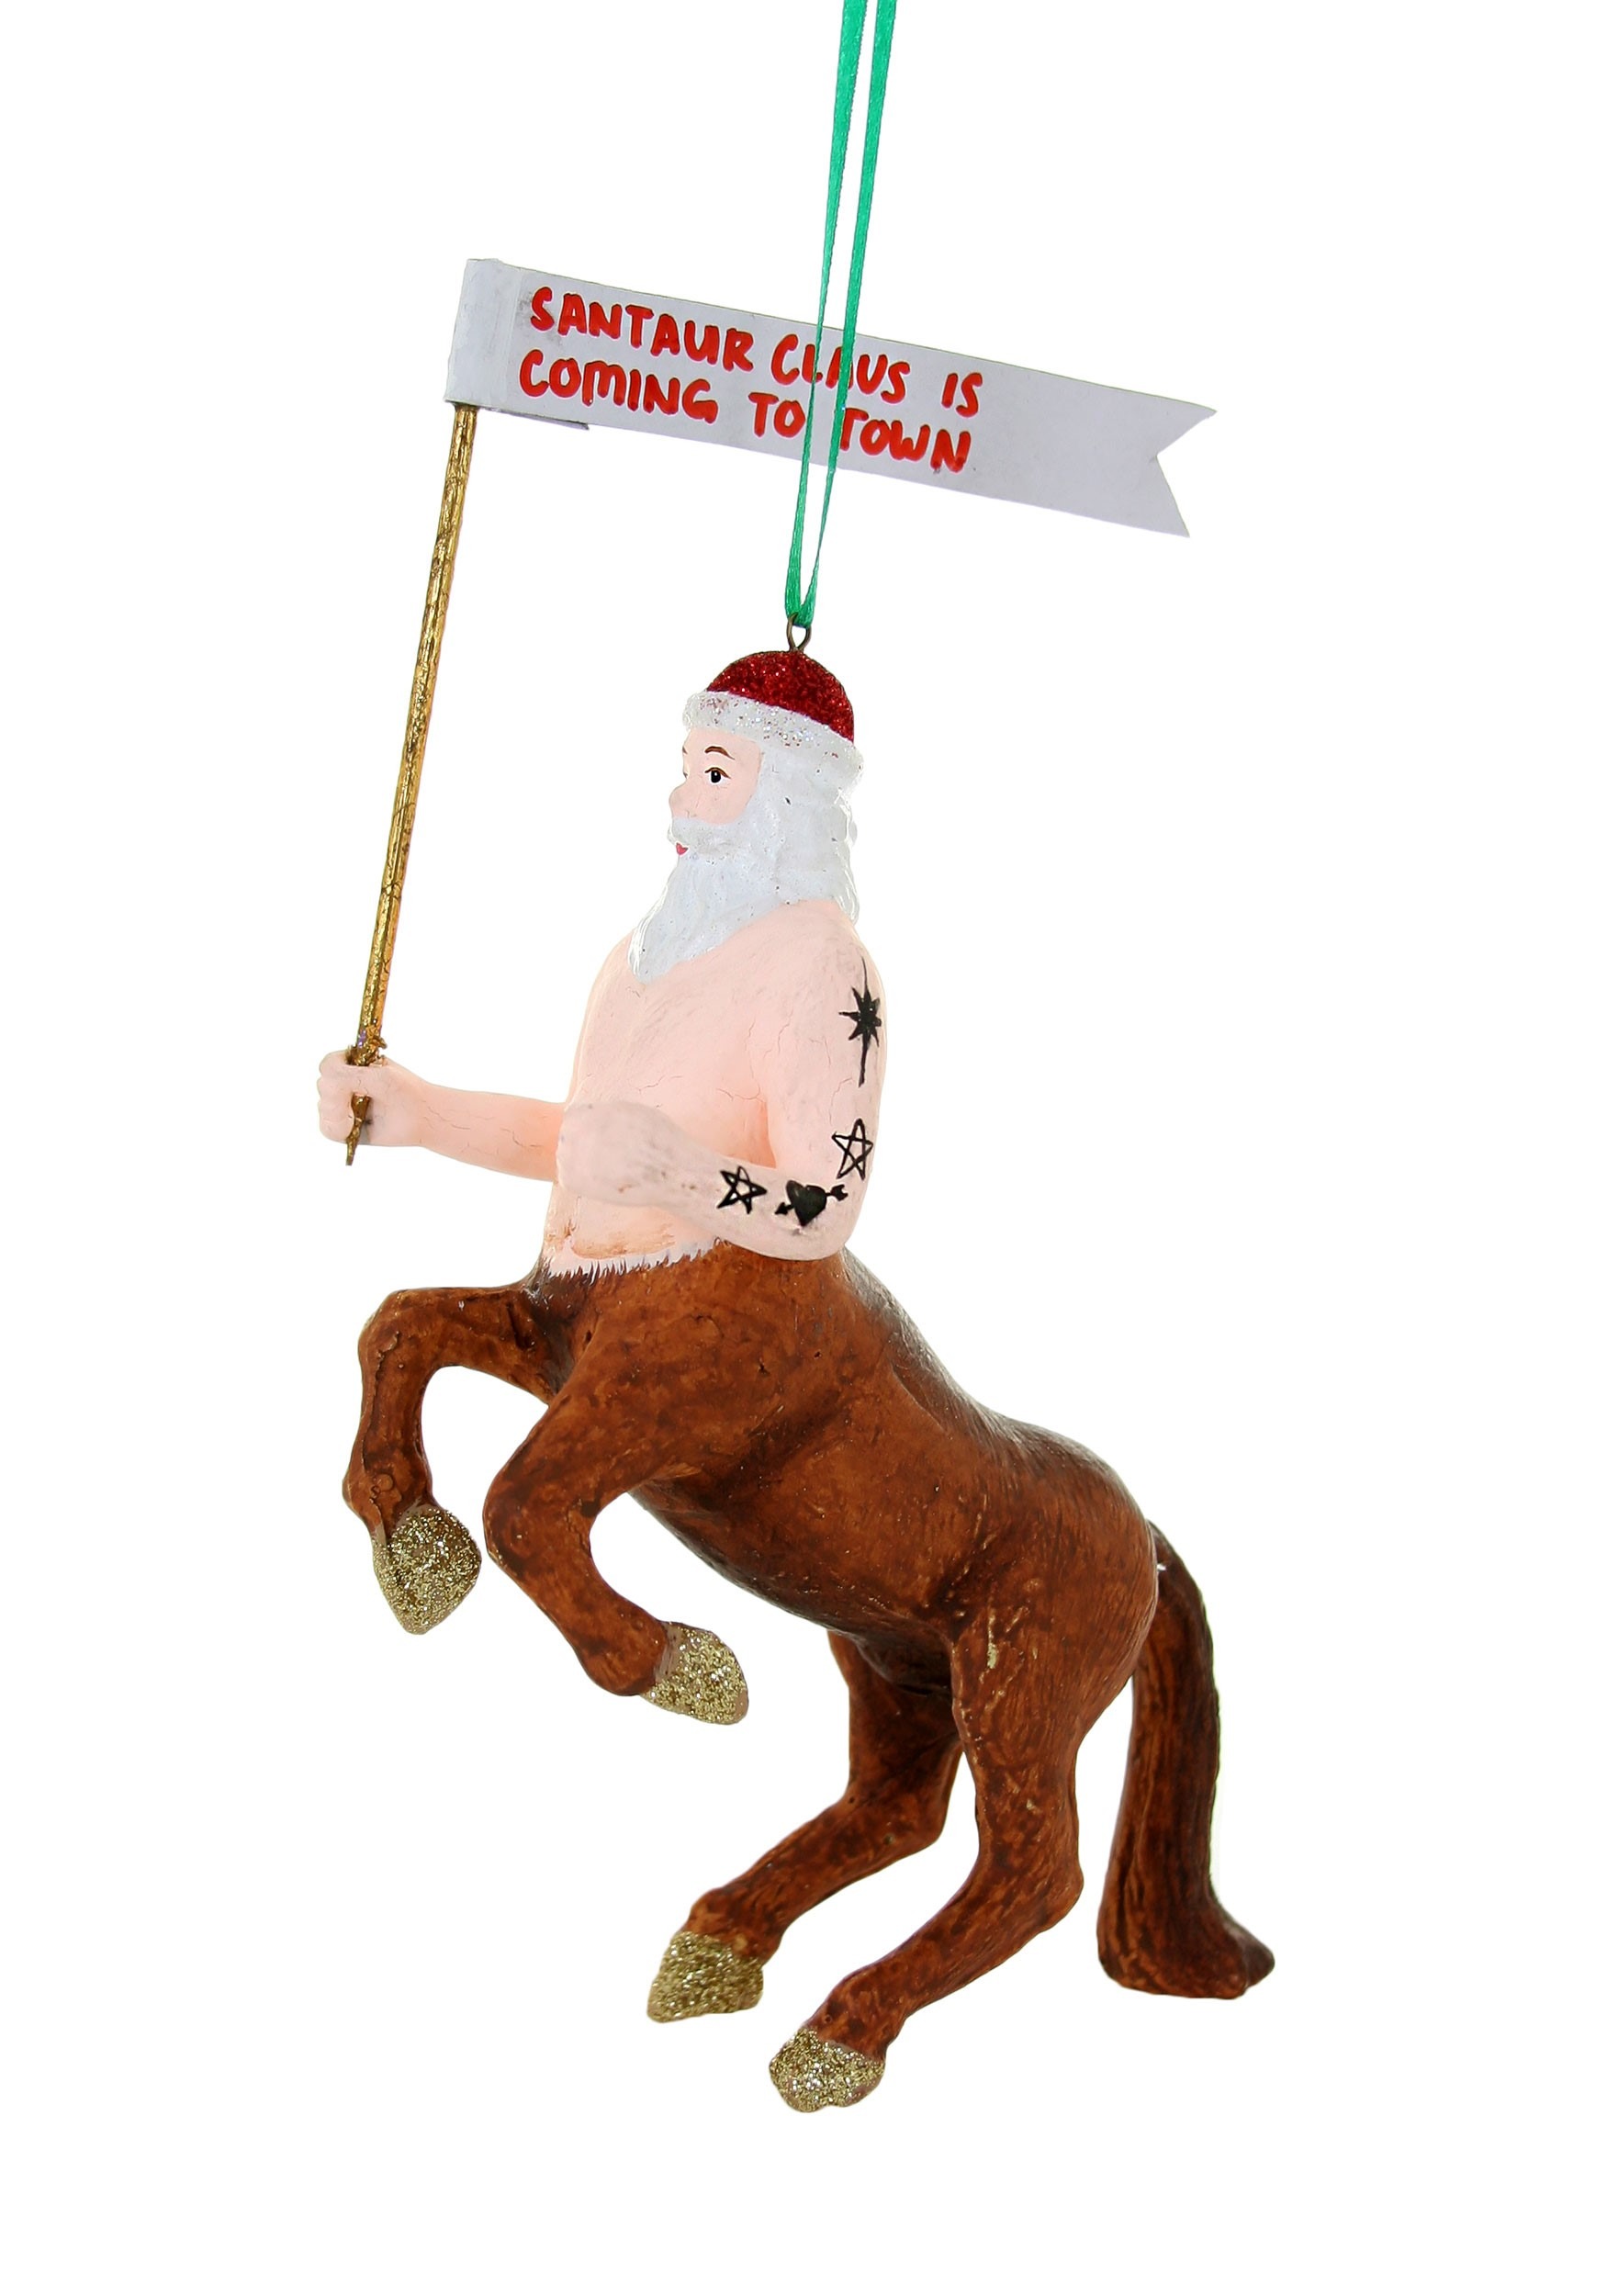 Christmas Santaur is Coming to Town Ornament